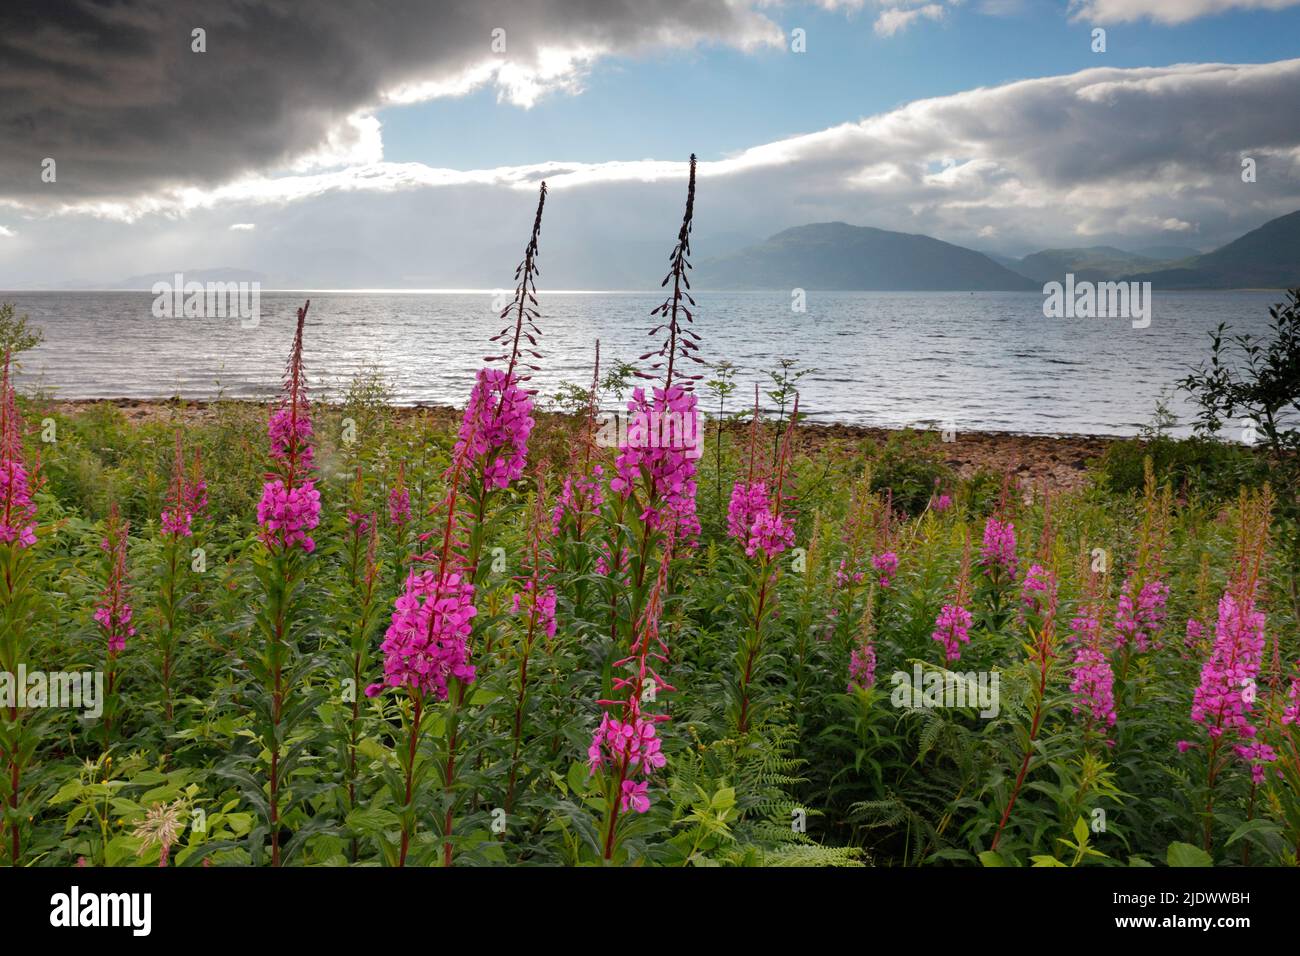 rosebay willowherb or fireweed (Latin: Chamaenerion angustifolium) (also known as Chamerion angustifolium and Epilobium angustifolium) at Loch Leven, Stock Photo